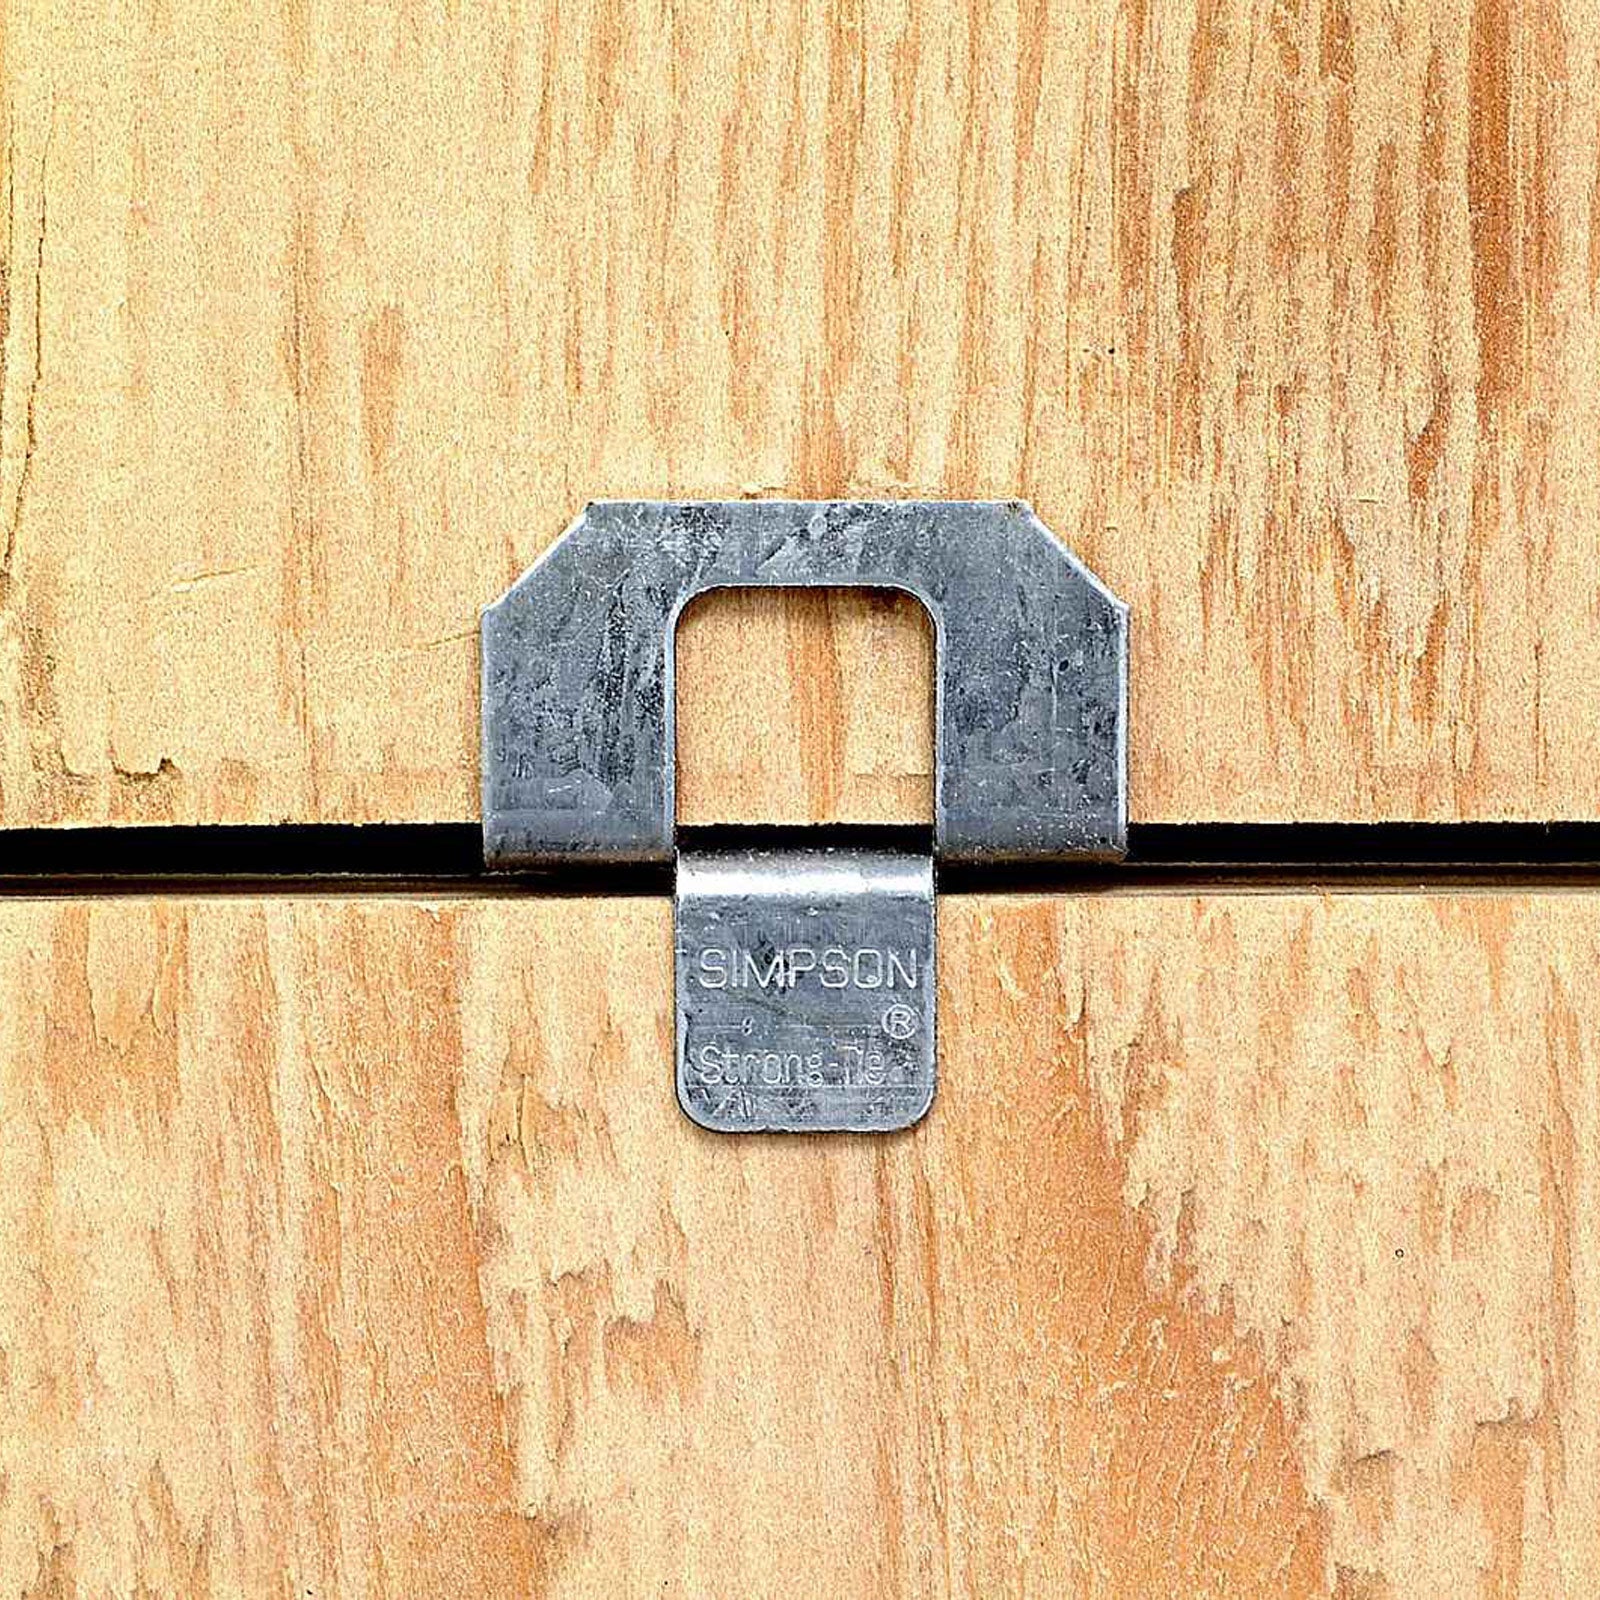 Simpson PSCL-3/4R50 - 3/4" Plywood Sheathing Clips Installation